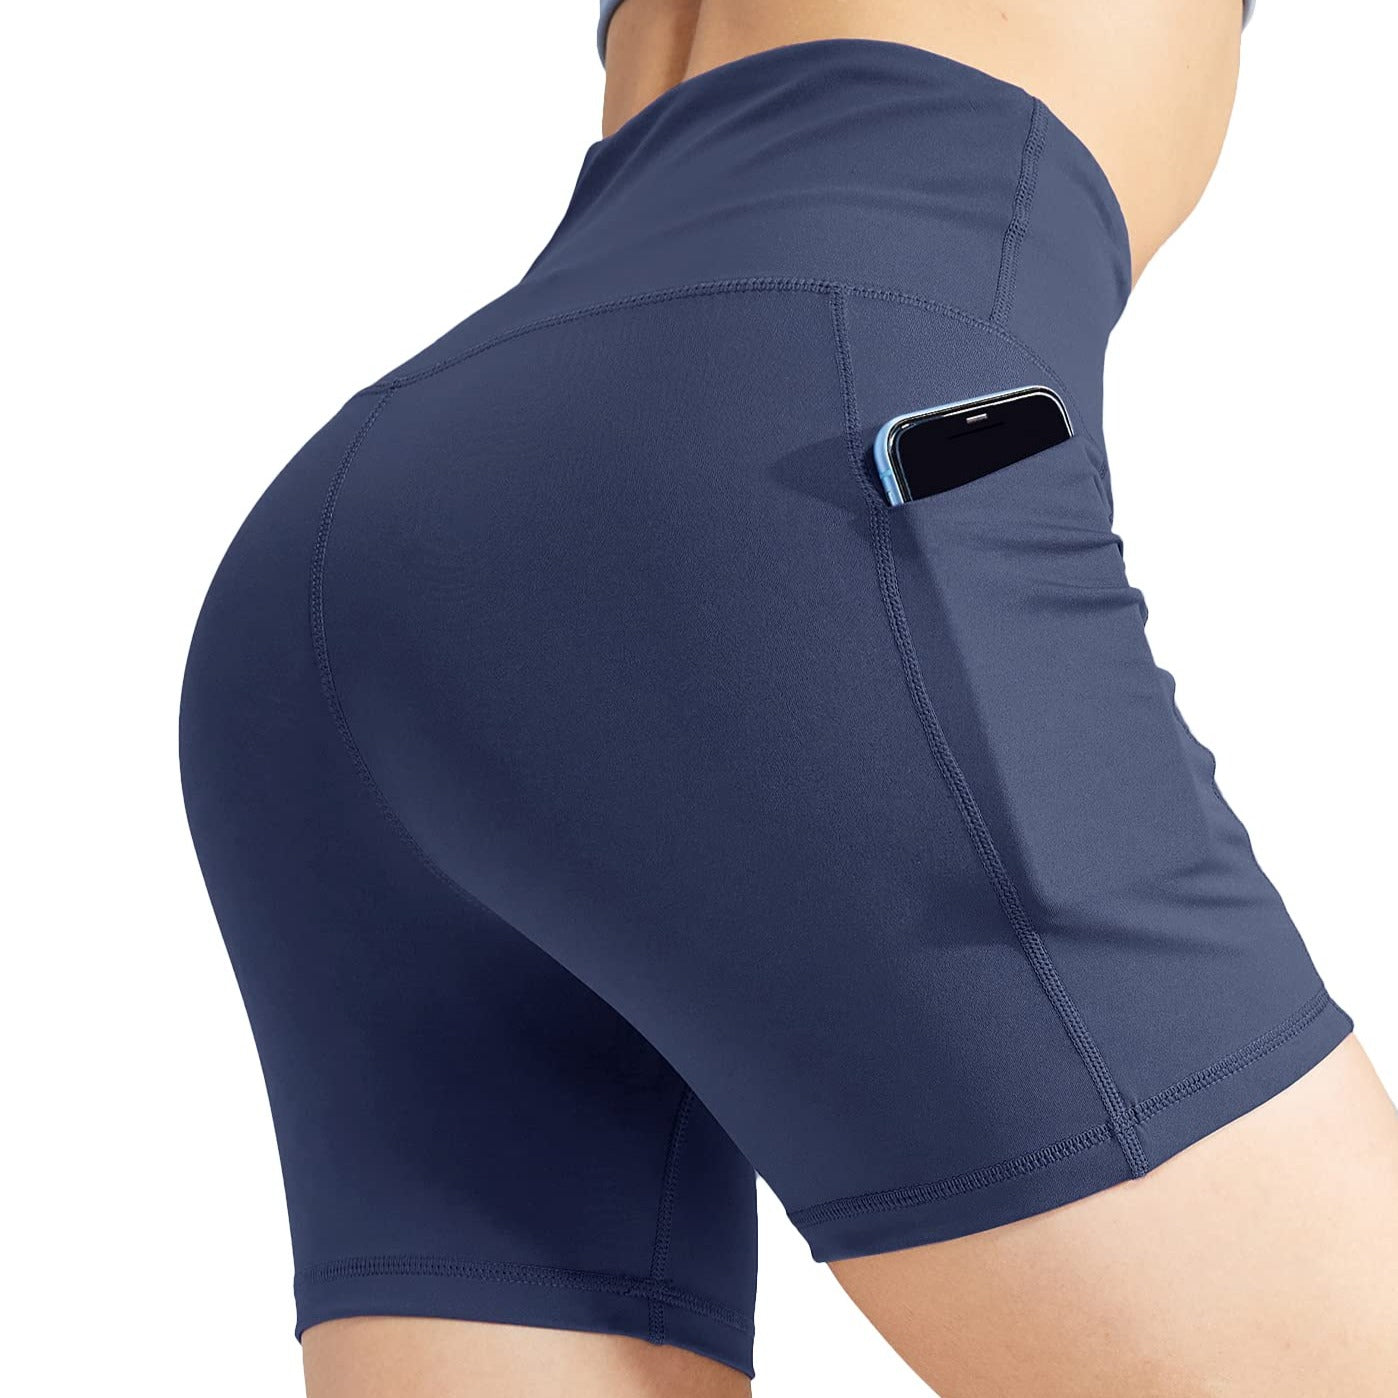 Black 2 In 1 Running Shorts High Waist Side Zippered Pockets Outdoor Sports  Shorts Womens Activewear, Check Out Today's Deals Now